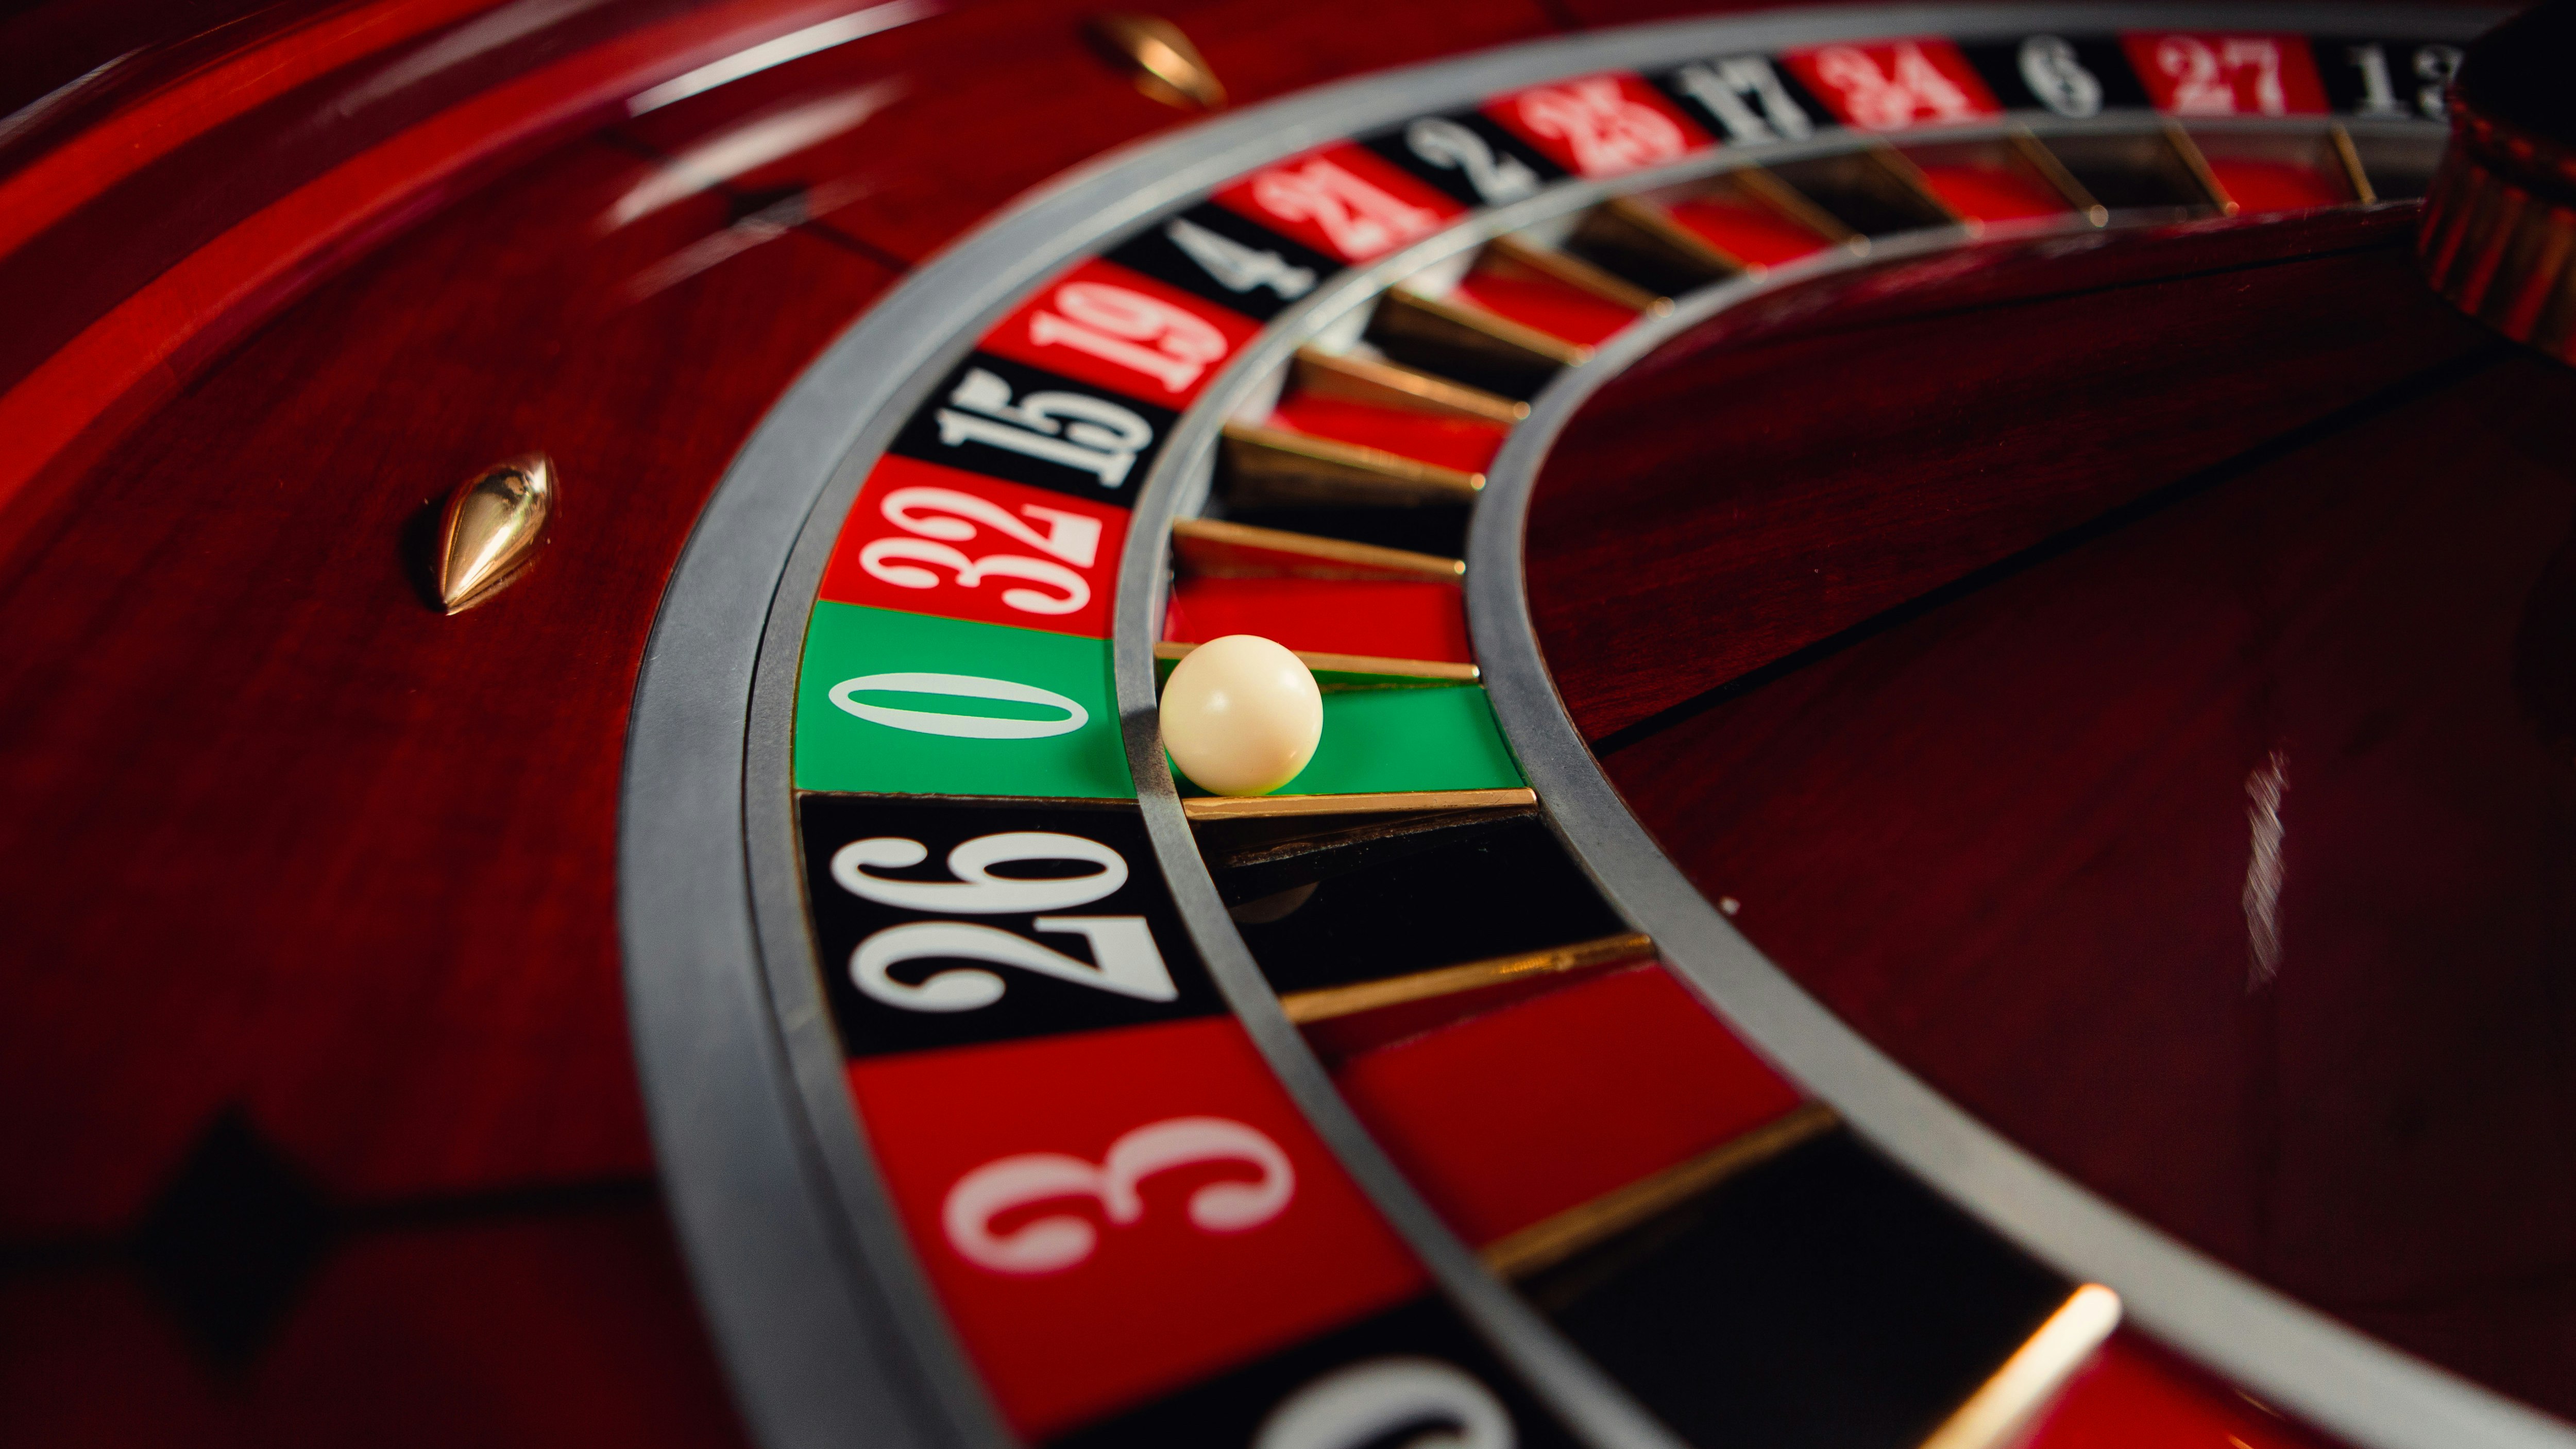 Betting on green zero in roulette: Odds, payouts & winning chances